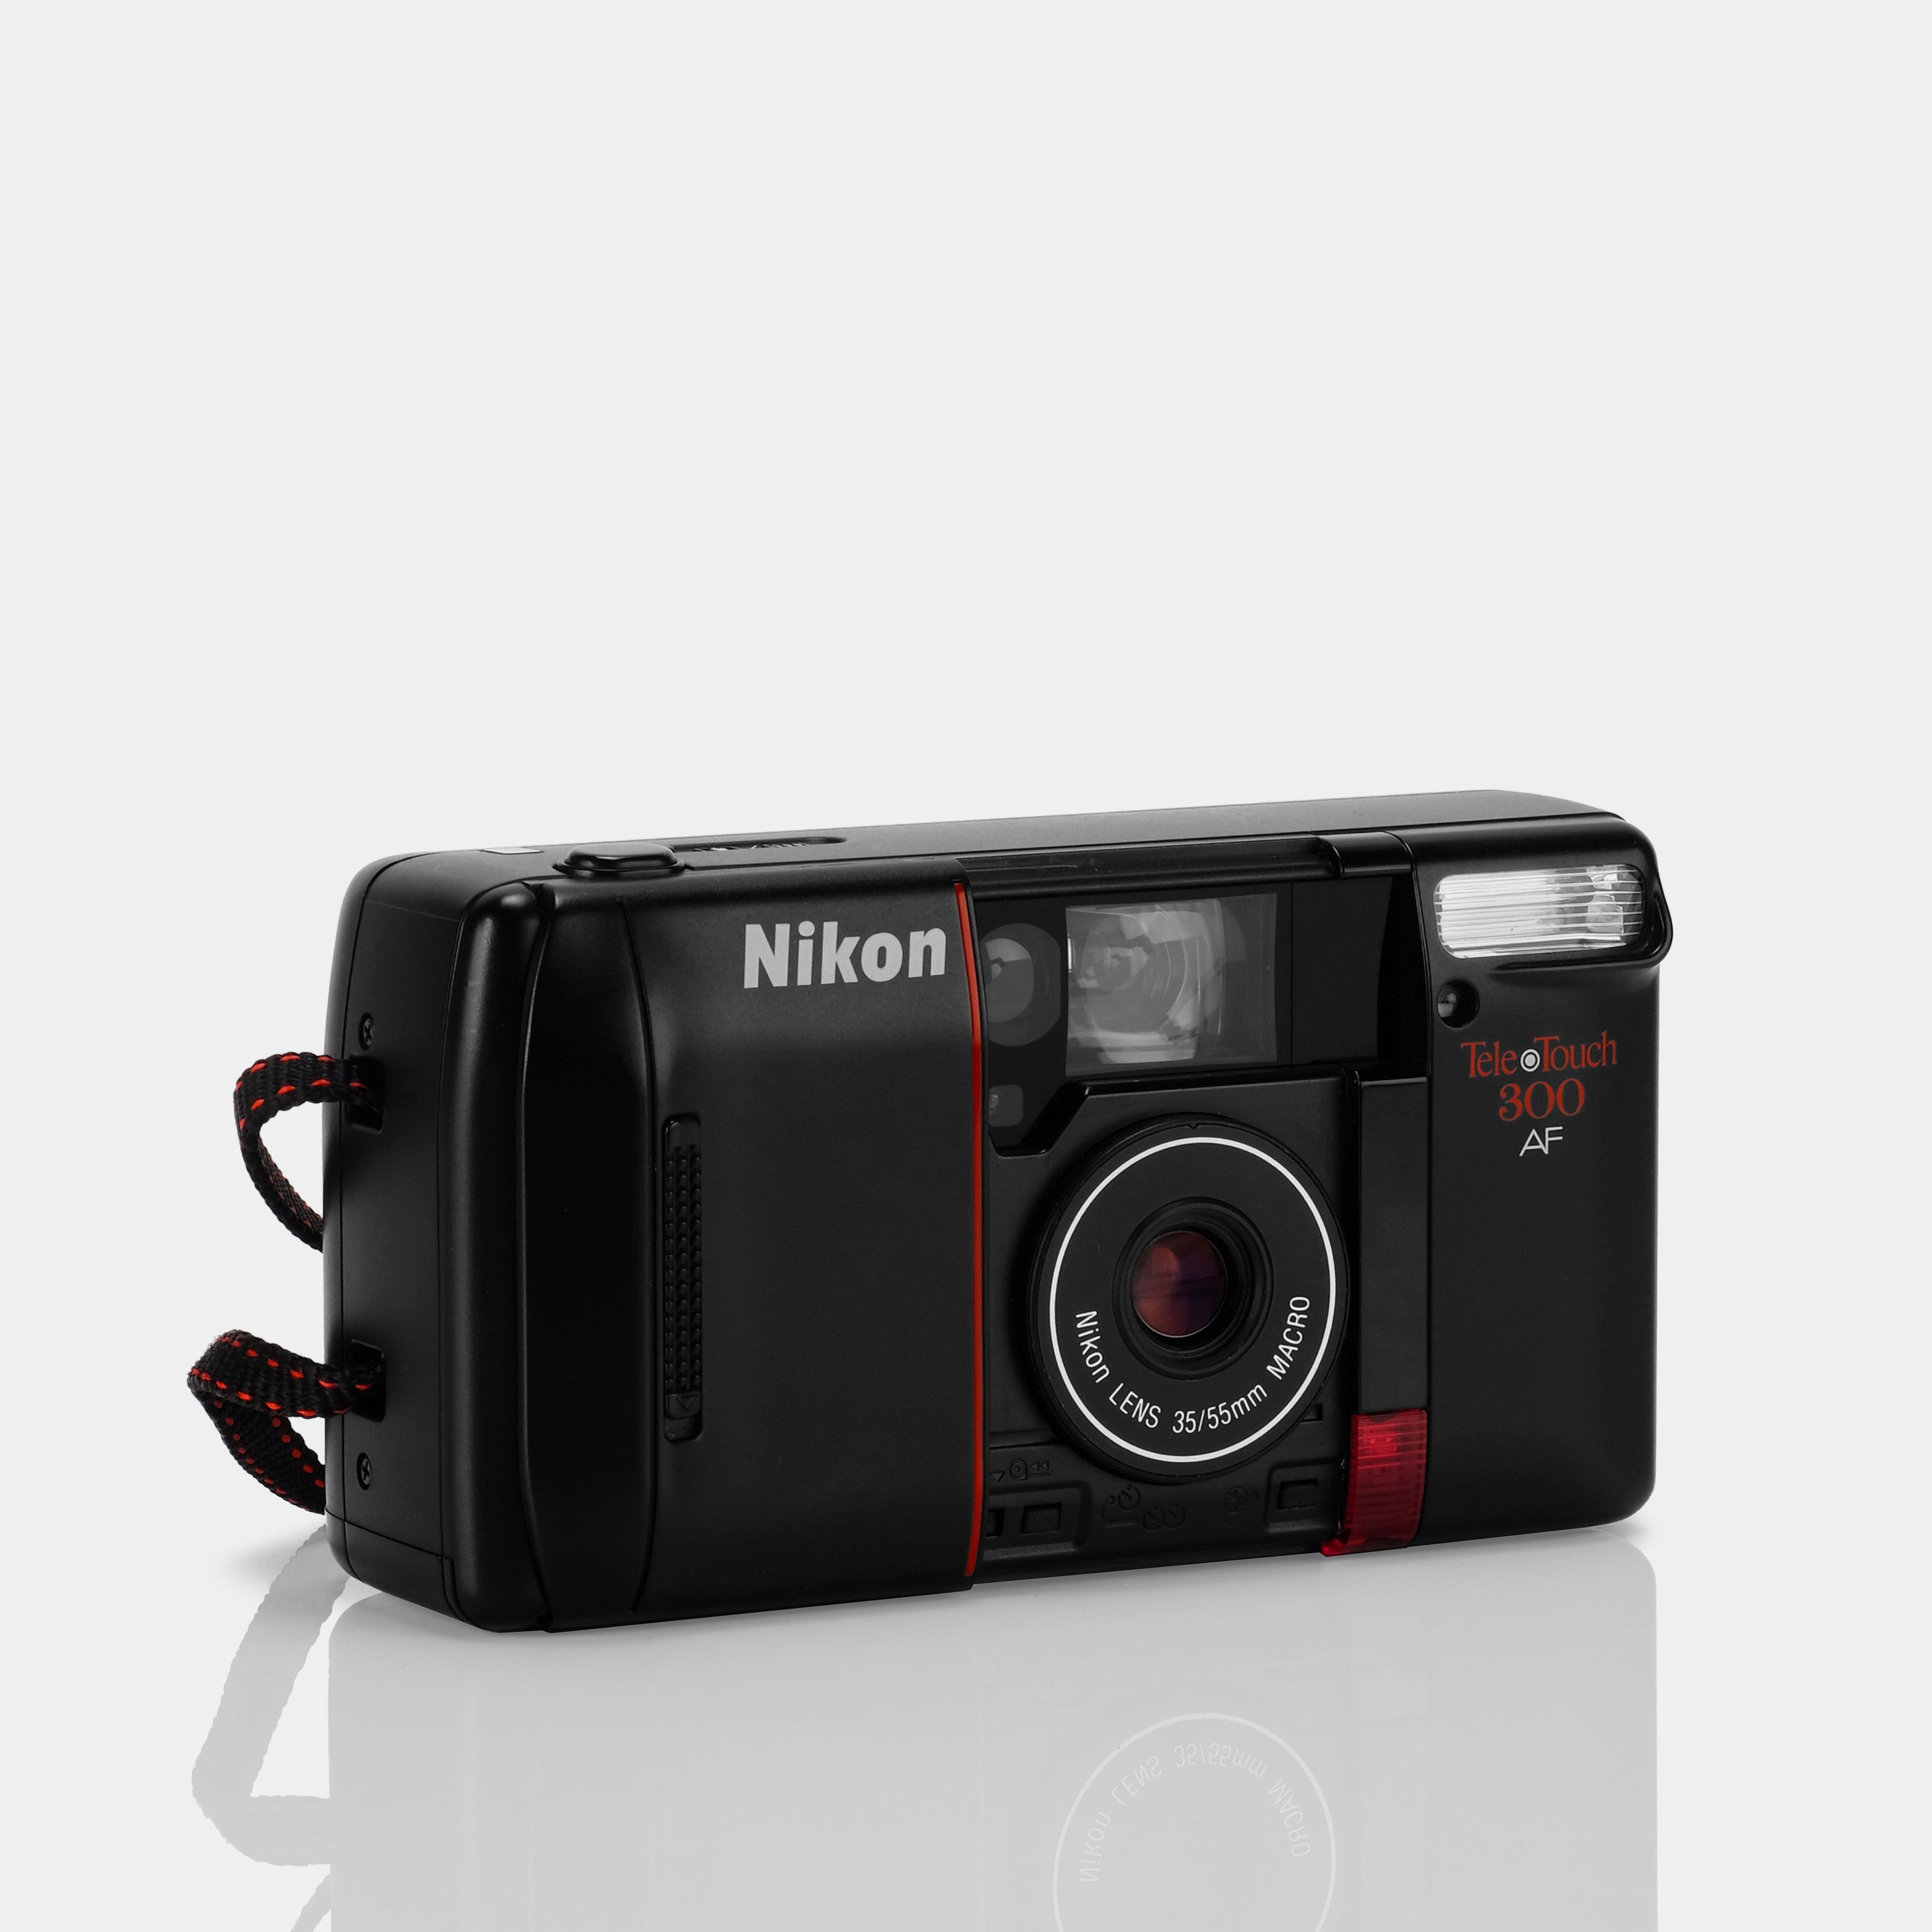 Nikon Tele Touch 300 AF 35mm Point and Shoot Film Camera